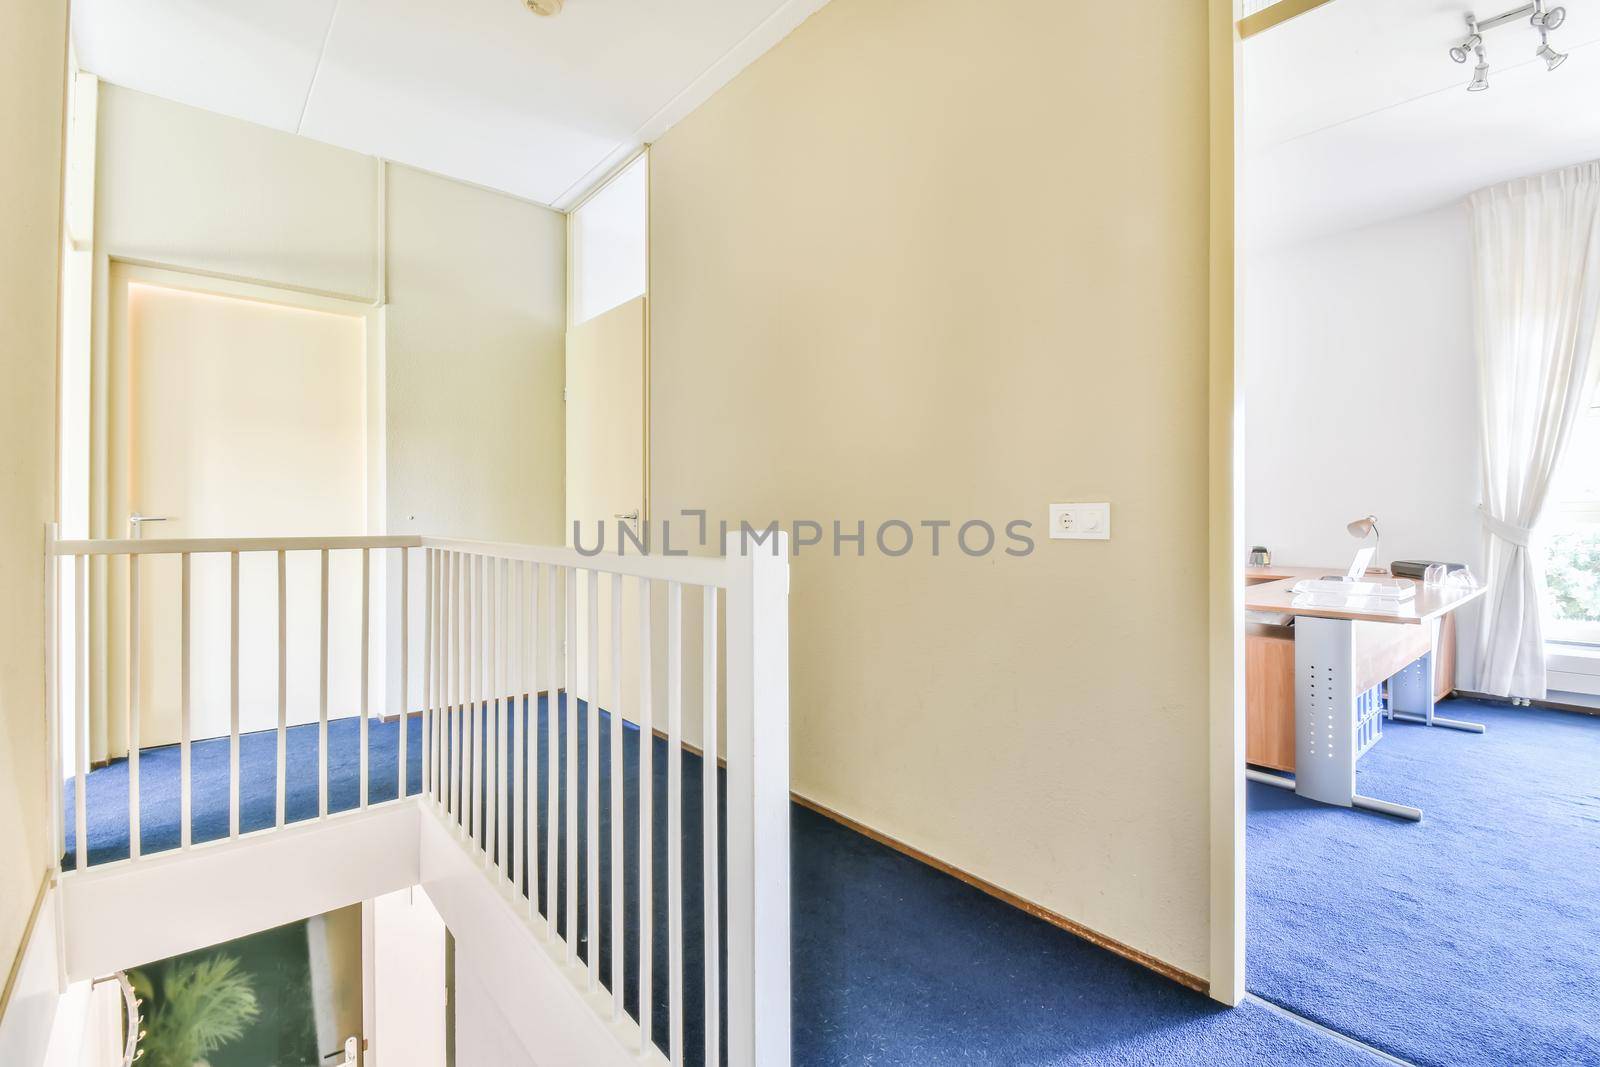 A room with a staircase leading down and a blue floor